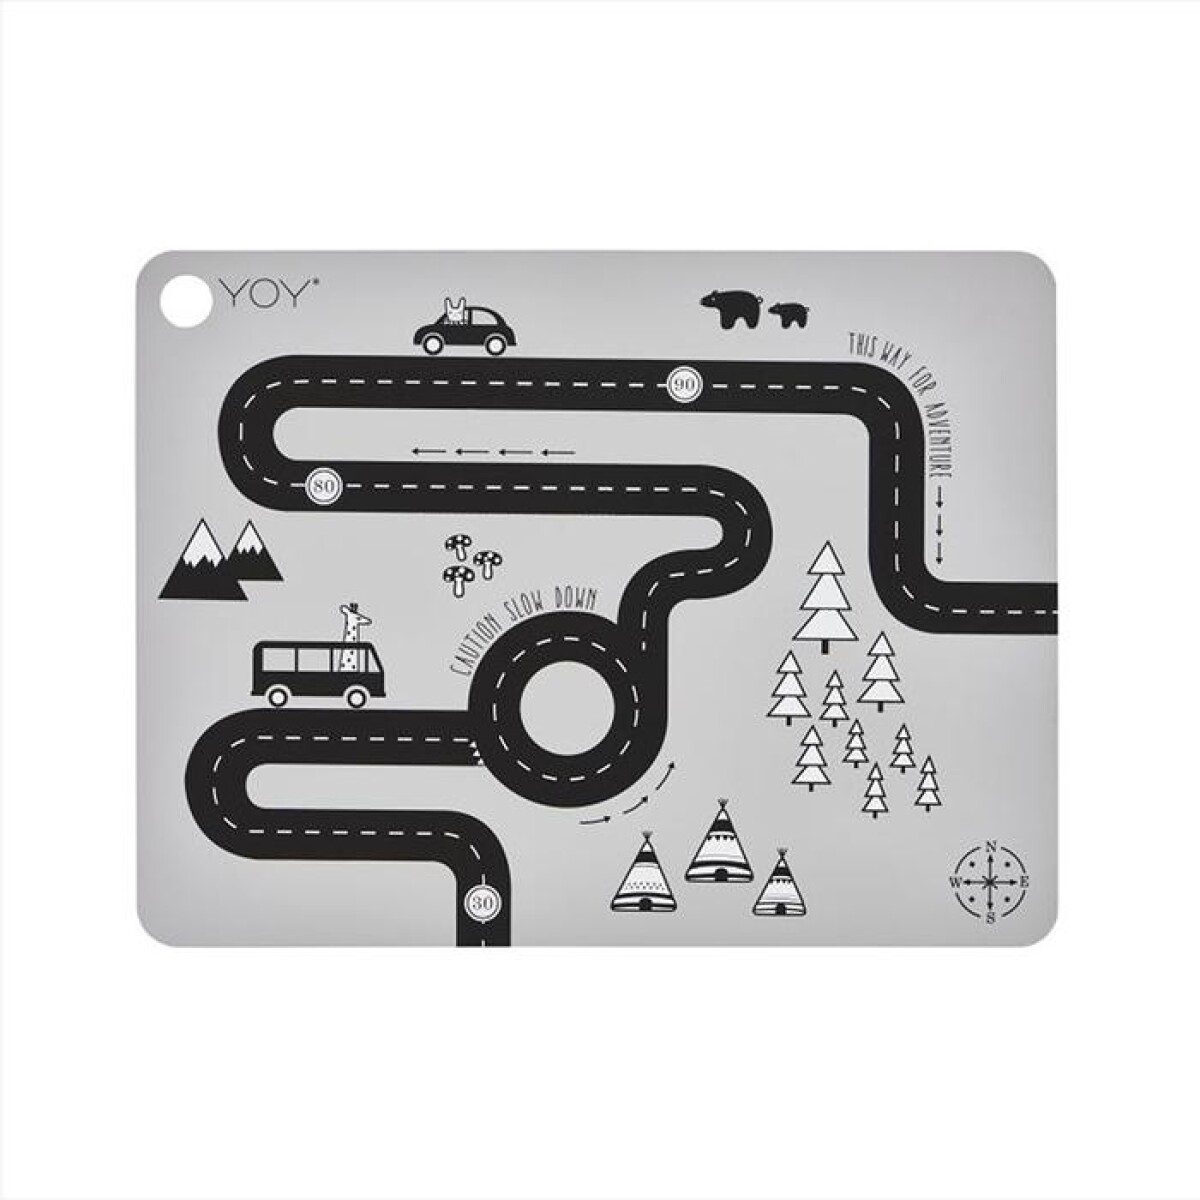 PLACEMATS INDIVIDUALES OYOY - PISTA ADVENTURE 